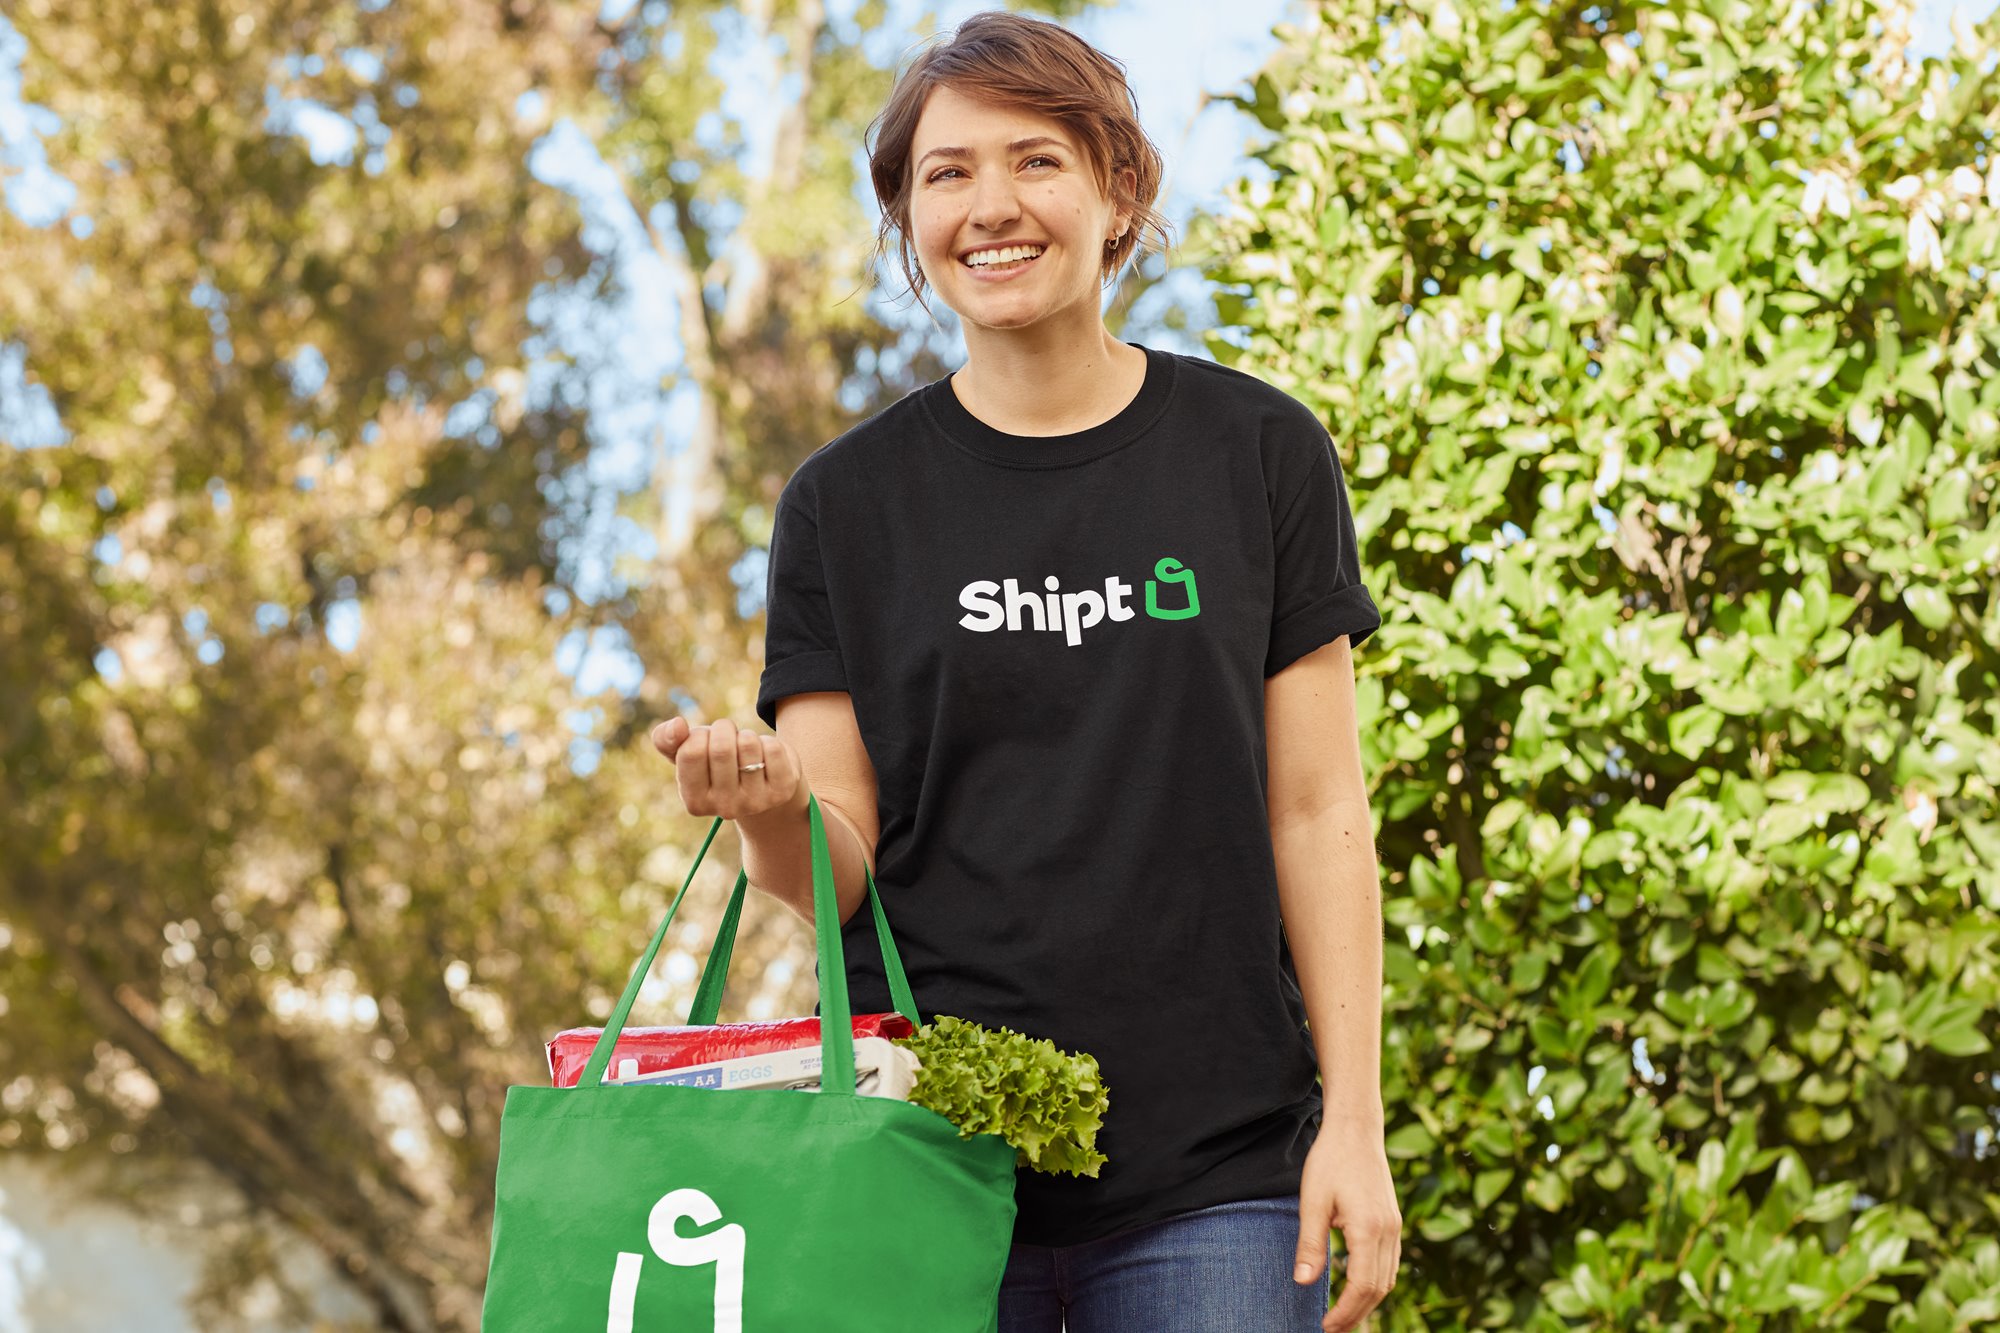 A Shipt Shopper in a black t-shirt smiles as the holds a green bag of groceries on her arm.